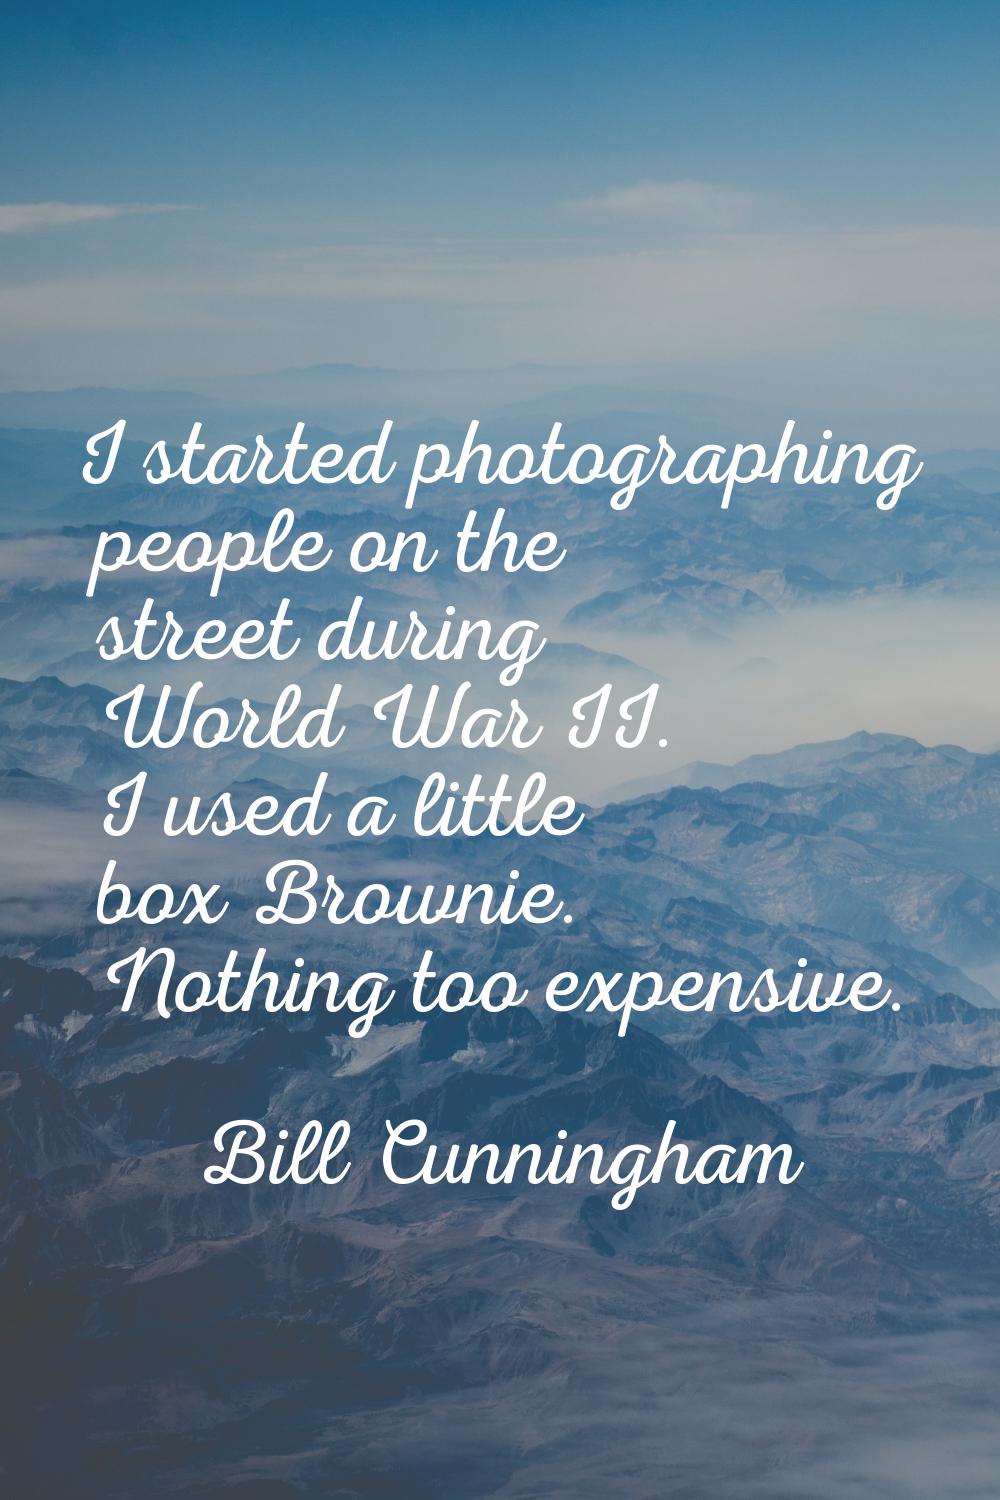 I started photographing people on the street during World War II. I used a little box Brownie. Noth